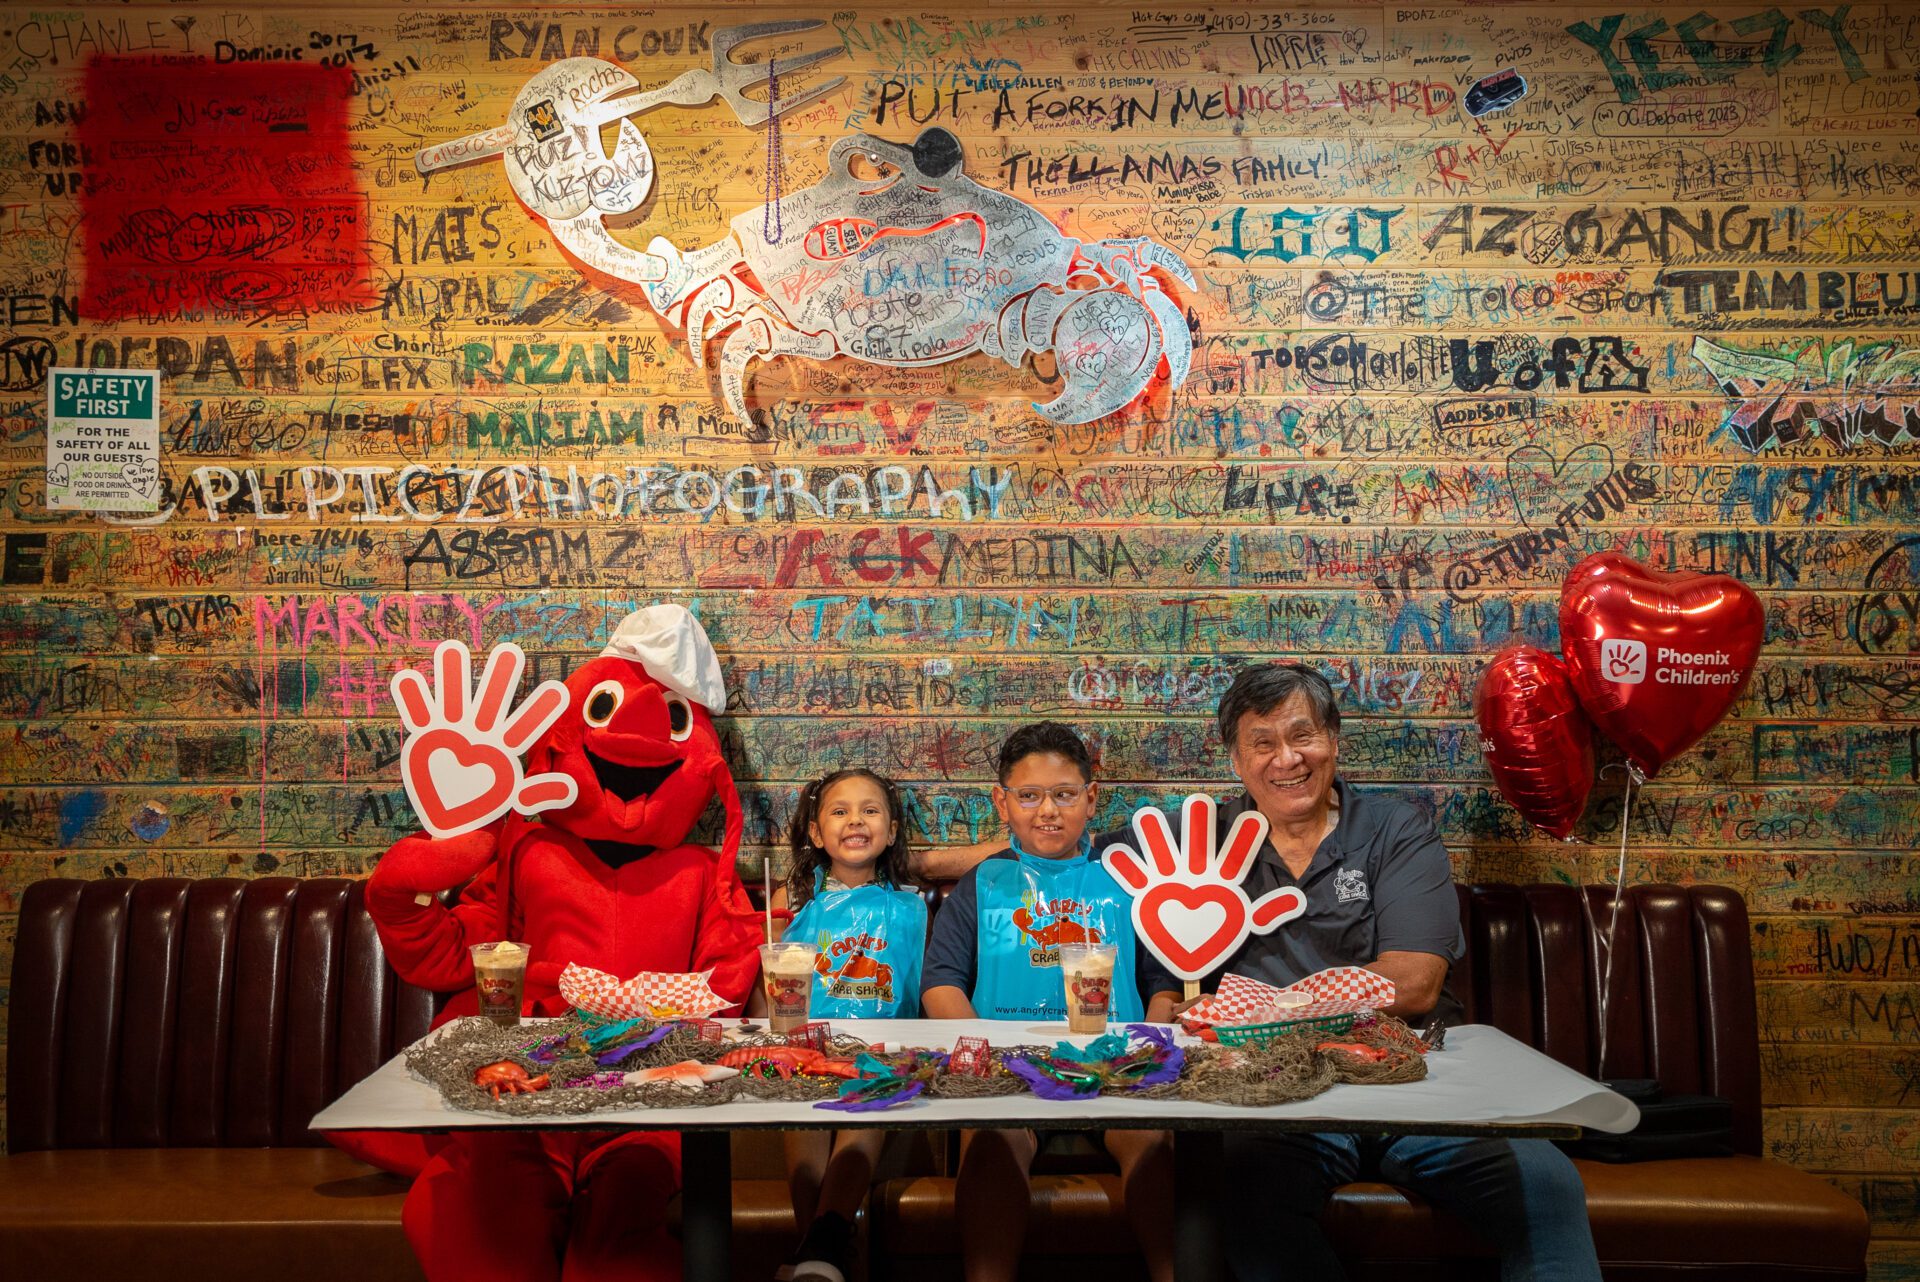 A Phoenix Children's patient and his sister enjoy a meal at Angry Crab Shack